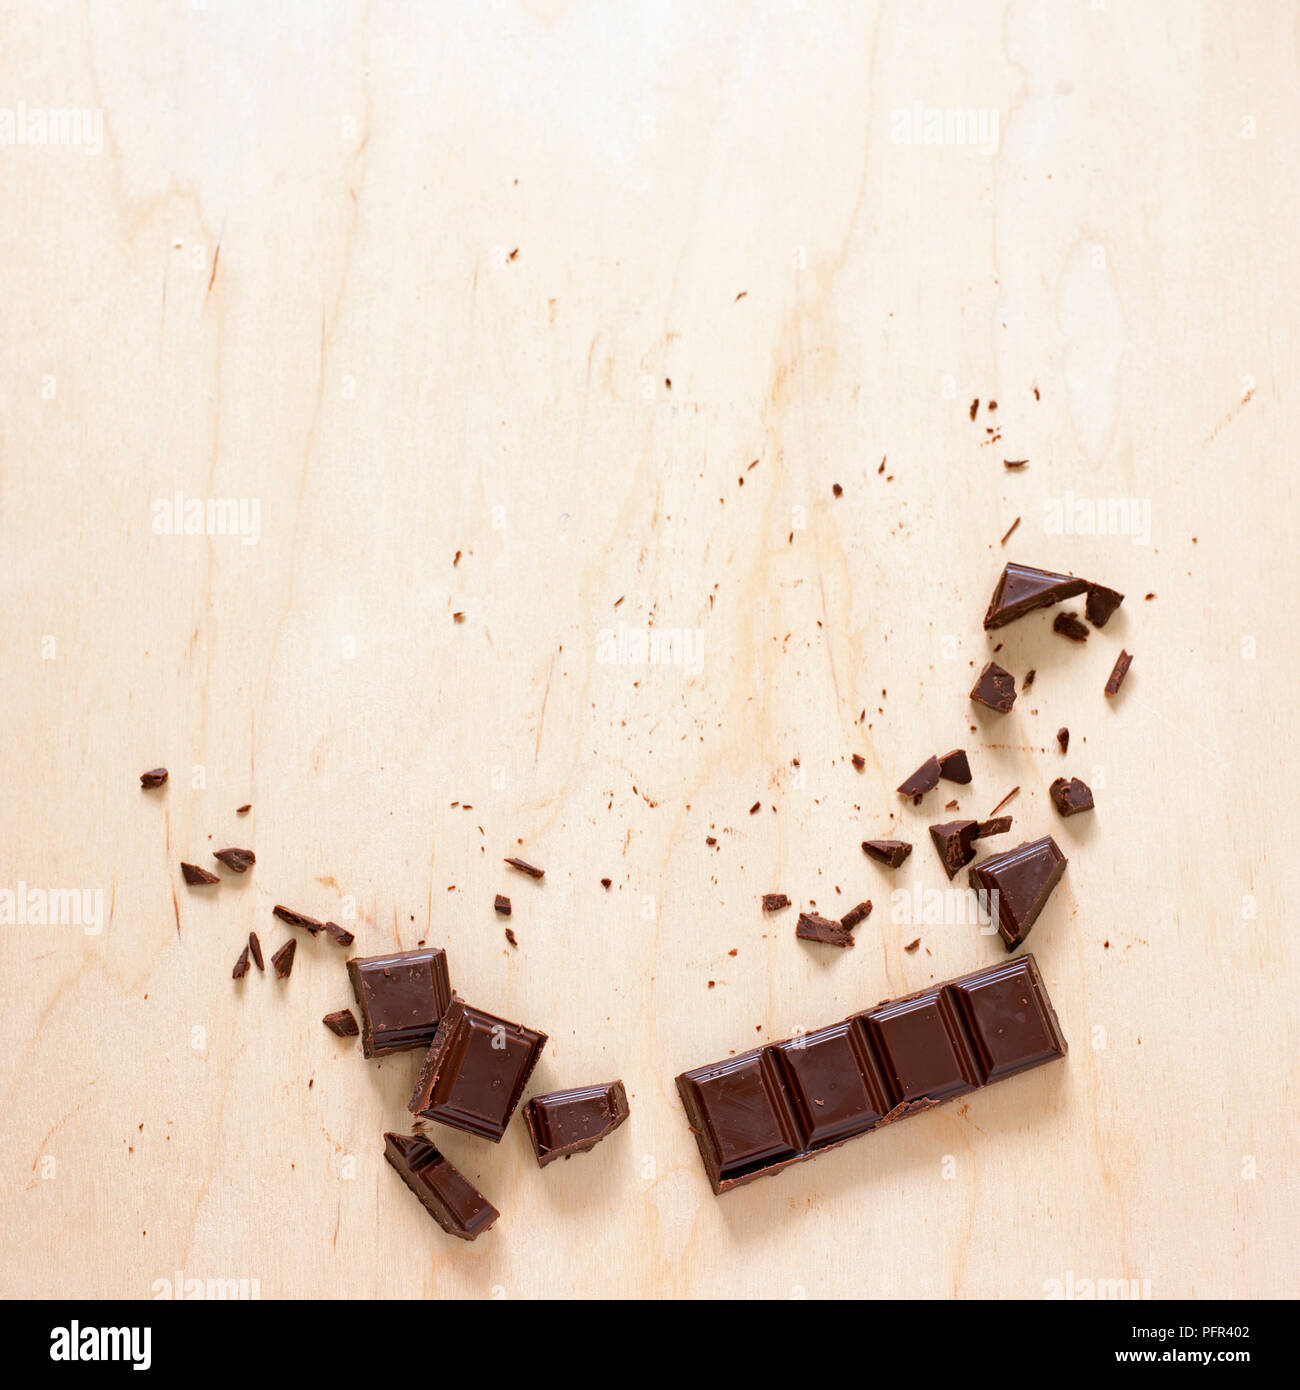 Chocolate broken into pieces on wooden surface Stock Photo